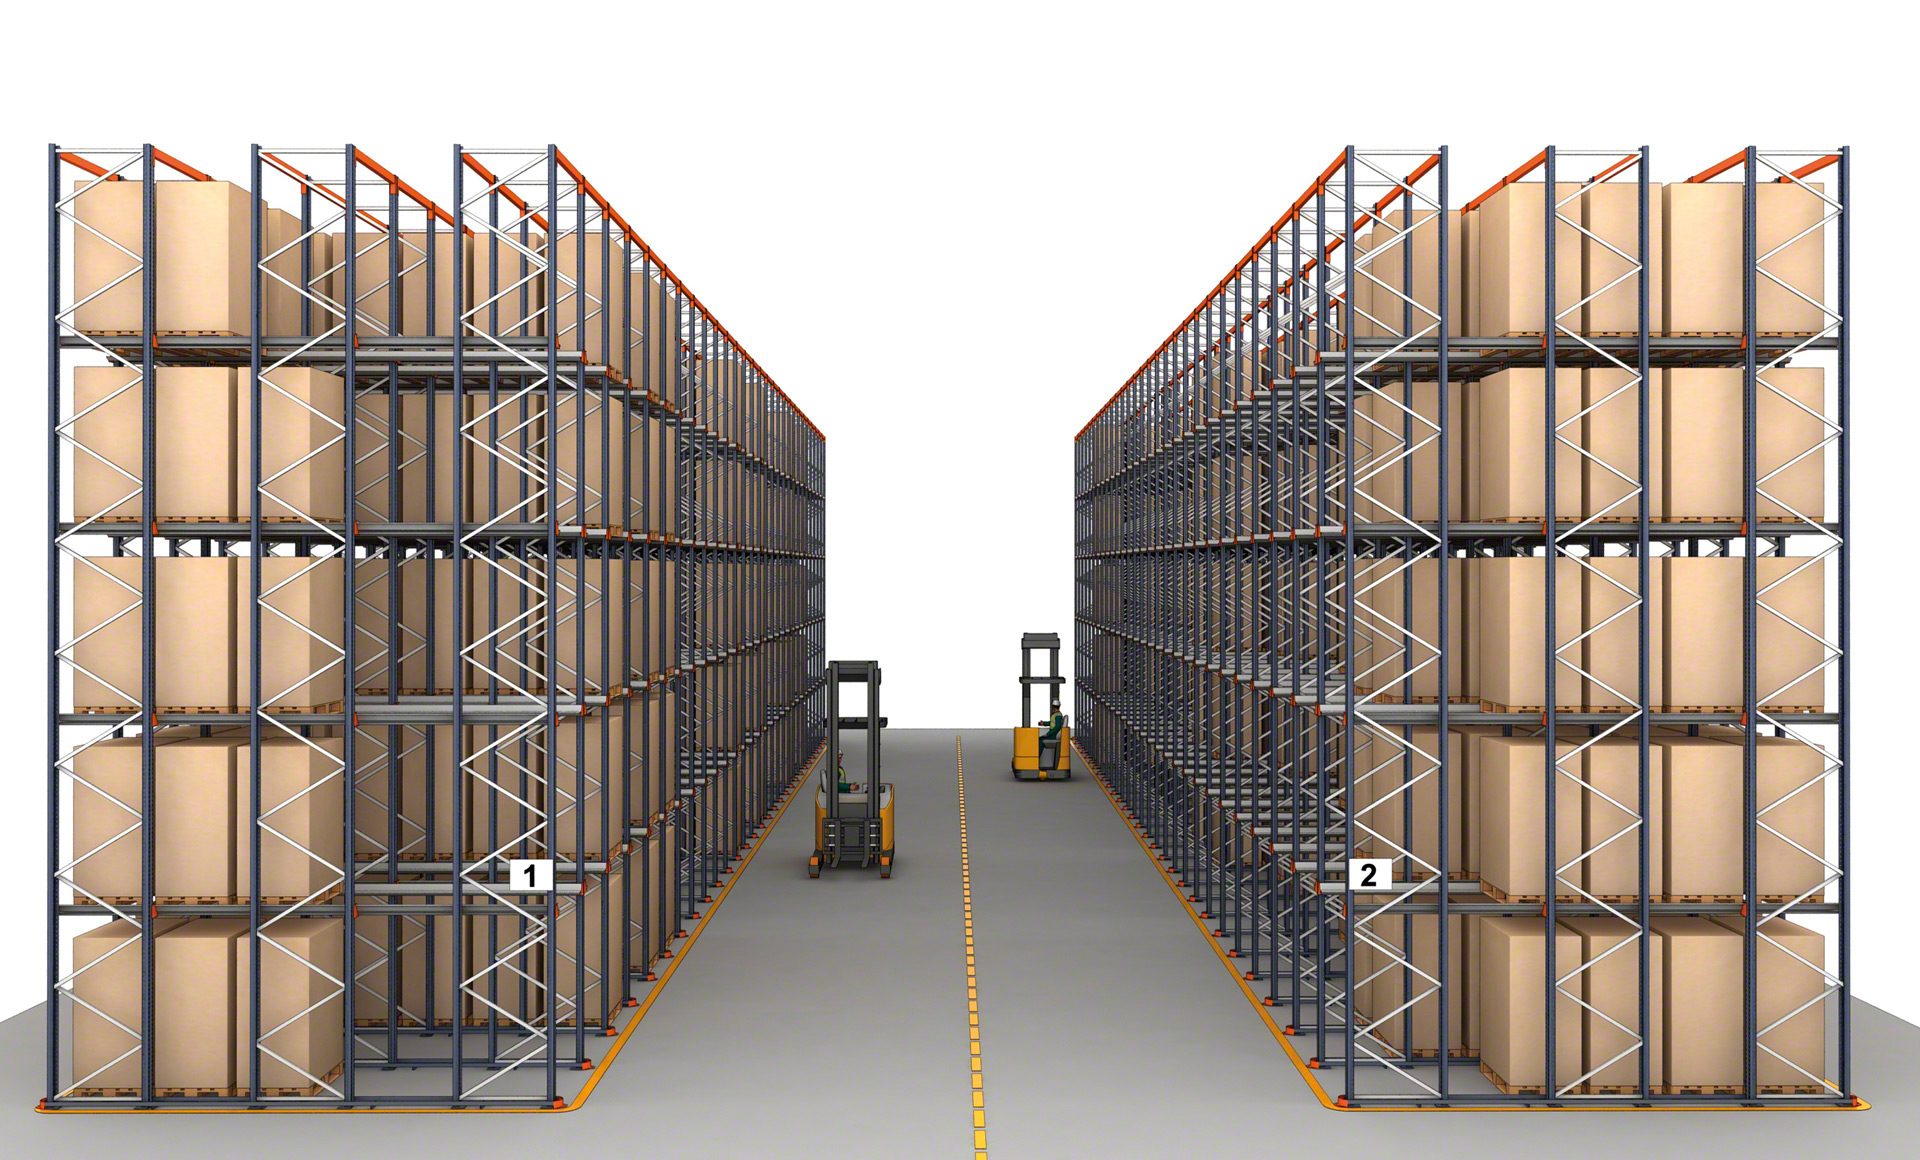 High-density racking systems significantly increase warehouse capacity